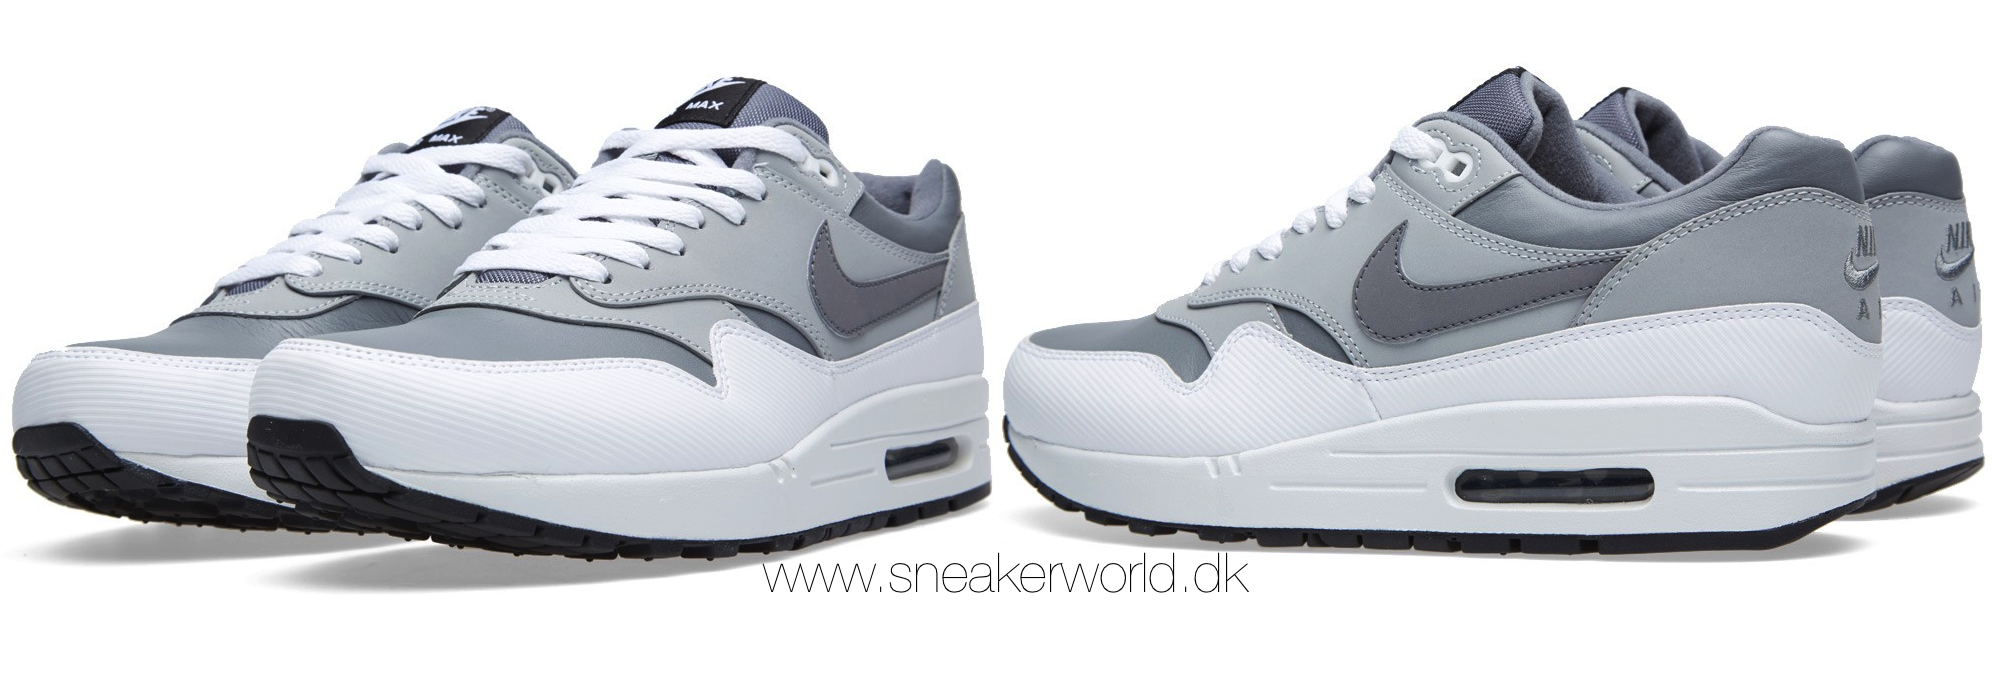 Nike Air Max 1 Leather Cool Grey